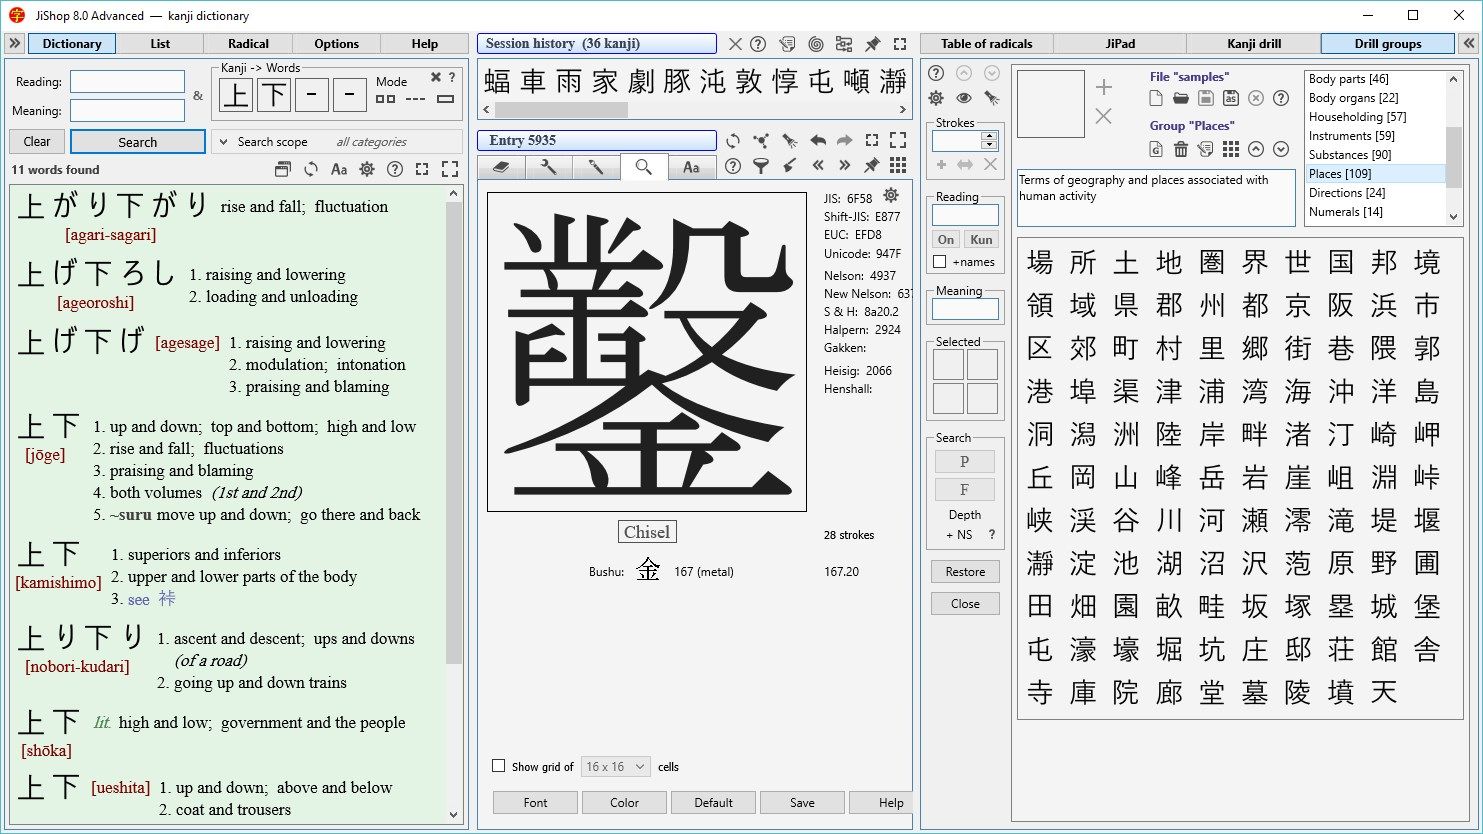 Phonetic dictionary (left), kanji magnification (center), and drill groups (right).